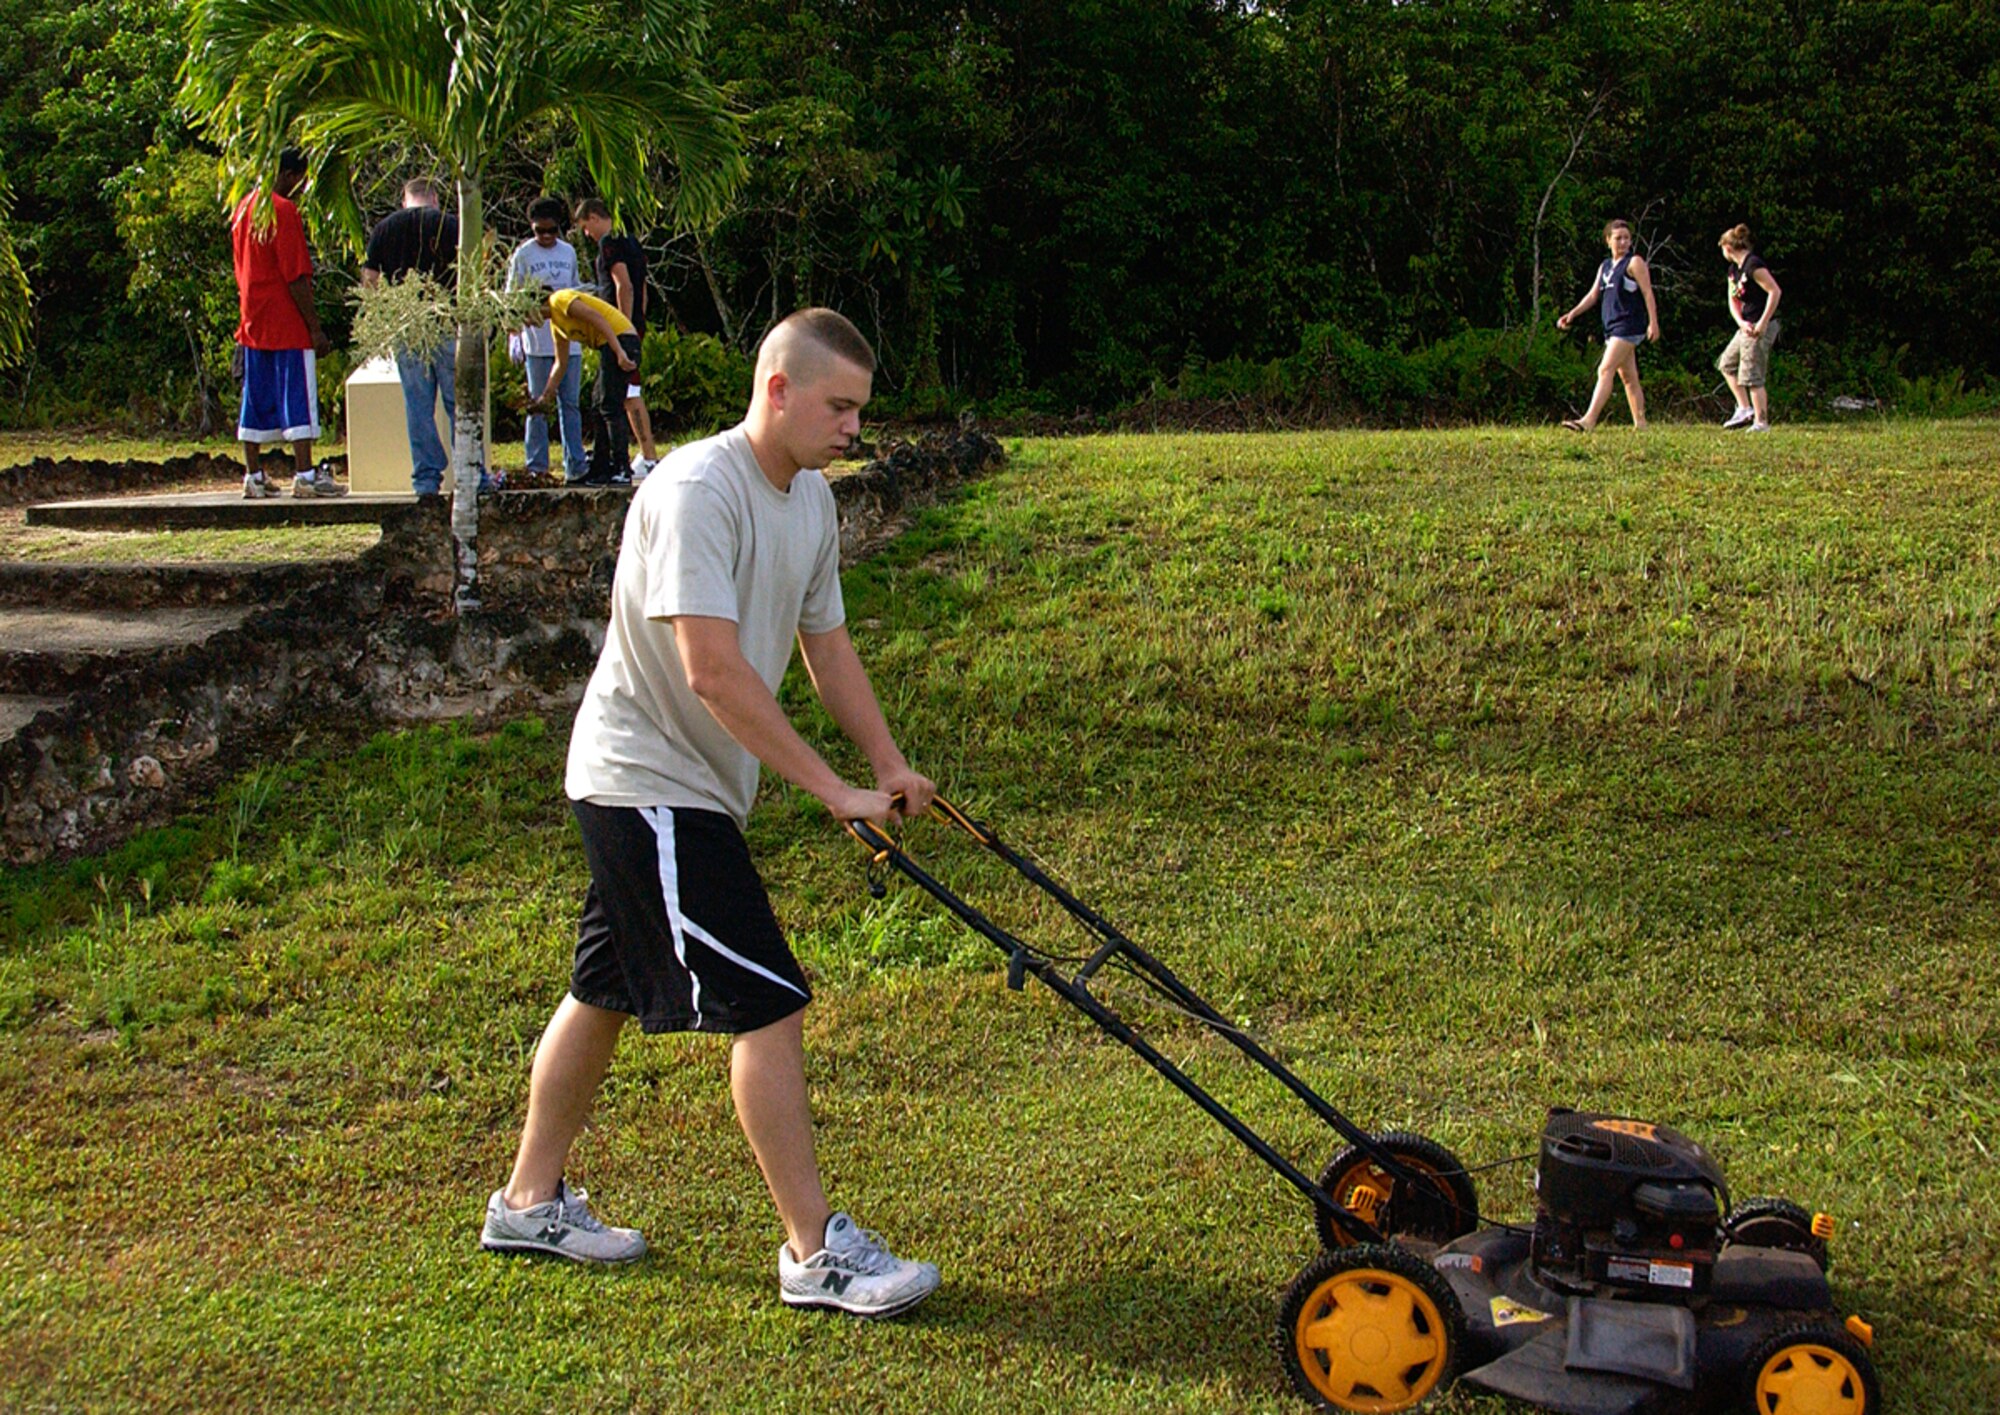 ANDERSEN AIR FORCE BASE, Guam -- Airman 1st Class Ryan Perkins, 36th Communications Squadron communications focal point controller and trustee of Andersen First Four Council, mows grass surrounding the World War II Memorial sponsored by Air Force Sergeants' Association Chapter 1560 June 6. The 10 volunteers from the Andersen First Four Council also swept debris off of the monument and picked up surrounding debris, ensuring the memorial was in pristine condition. Currently, the council performs one volunteer effort each month. (U.S. Air Force photo by Airman Carissa Wolff)     